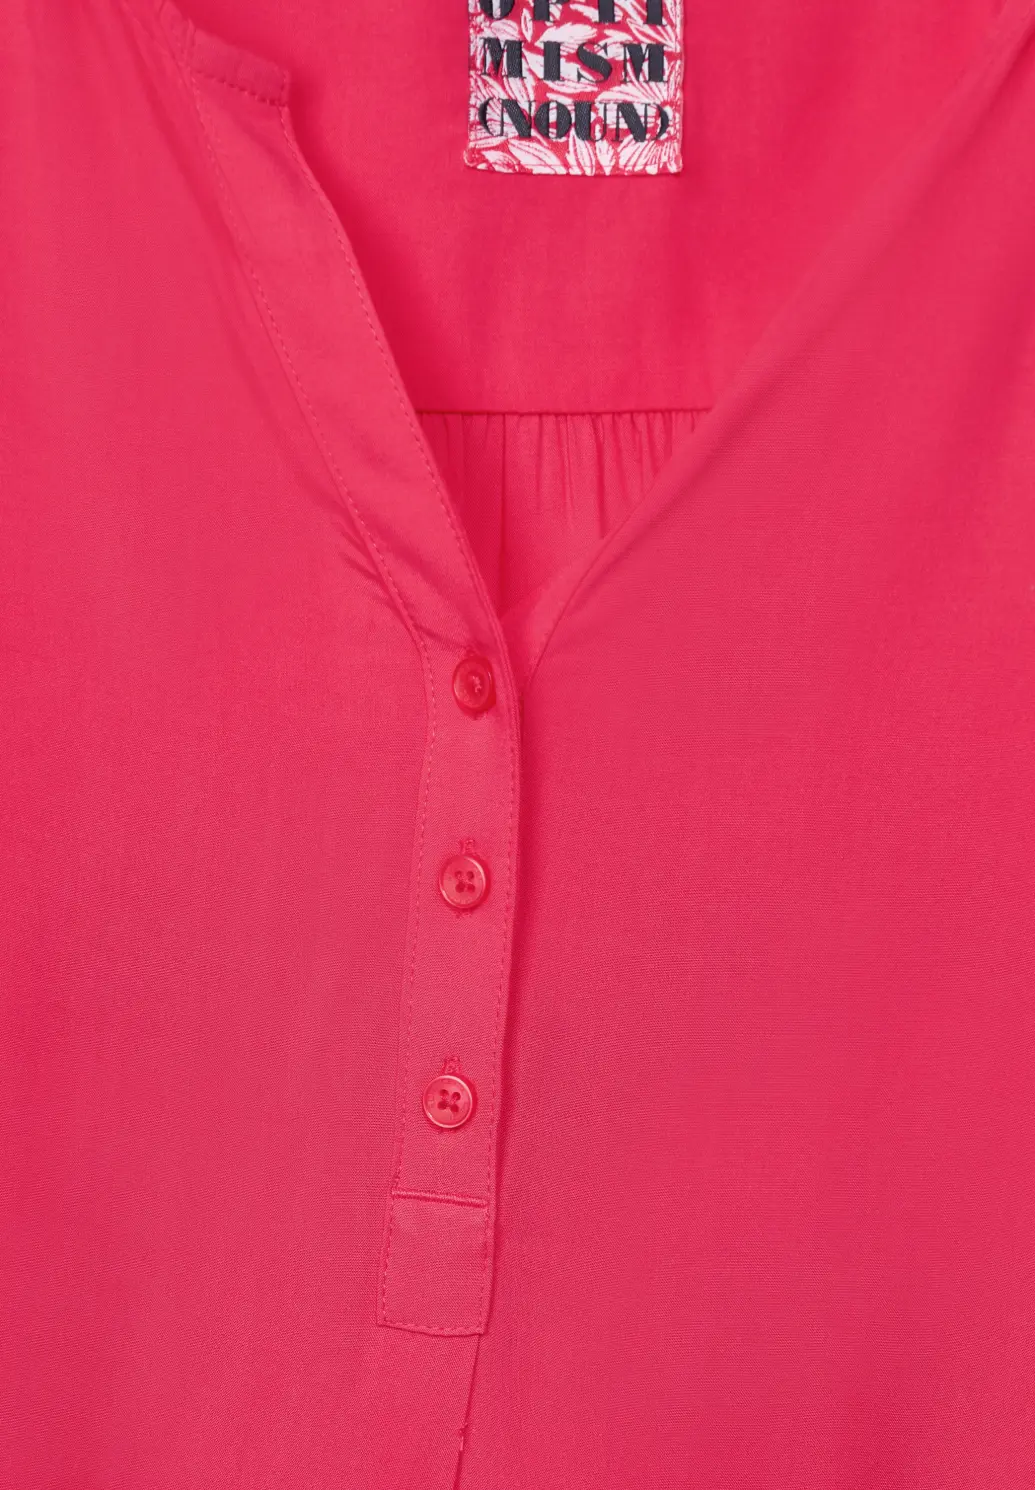 Rot Cotton Bluse - Basic / CECIL | Unifarbene Strawberry - Red Blues